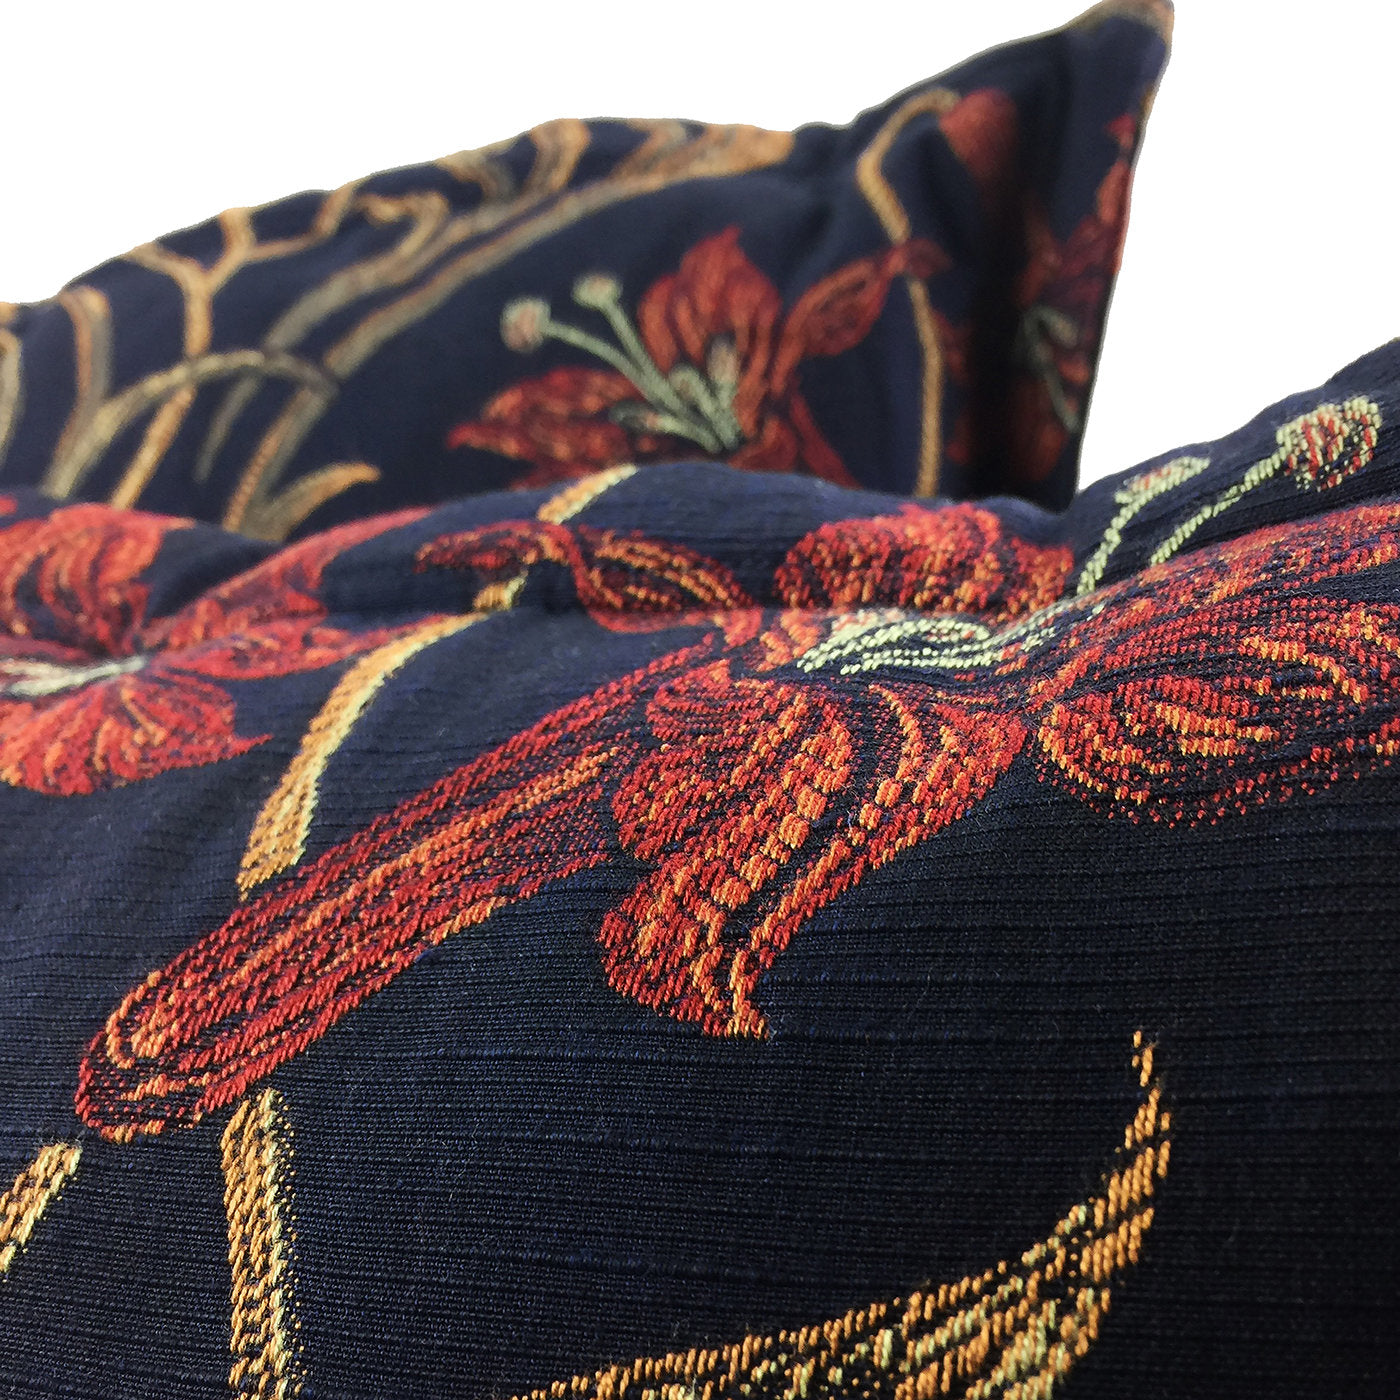 Set of 2 Red Lilies Throw Cushions  - Alternative view 2